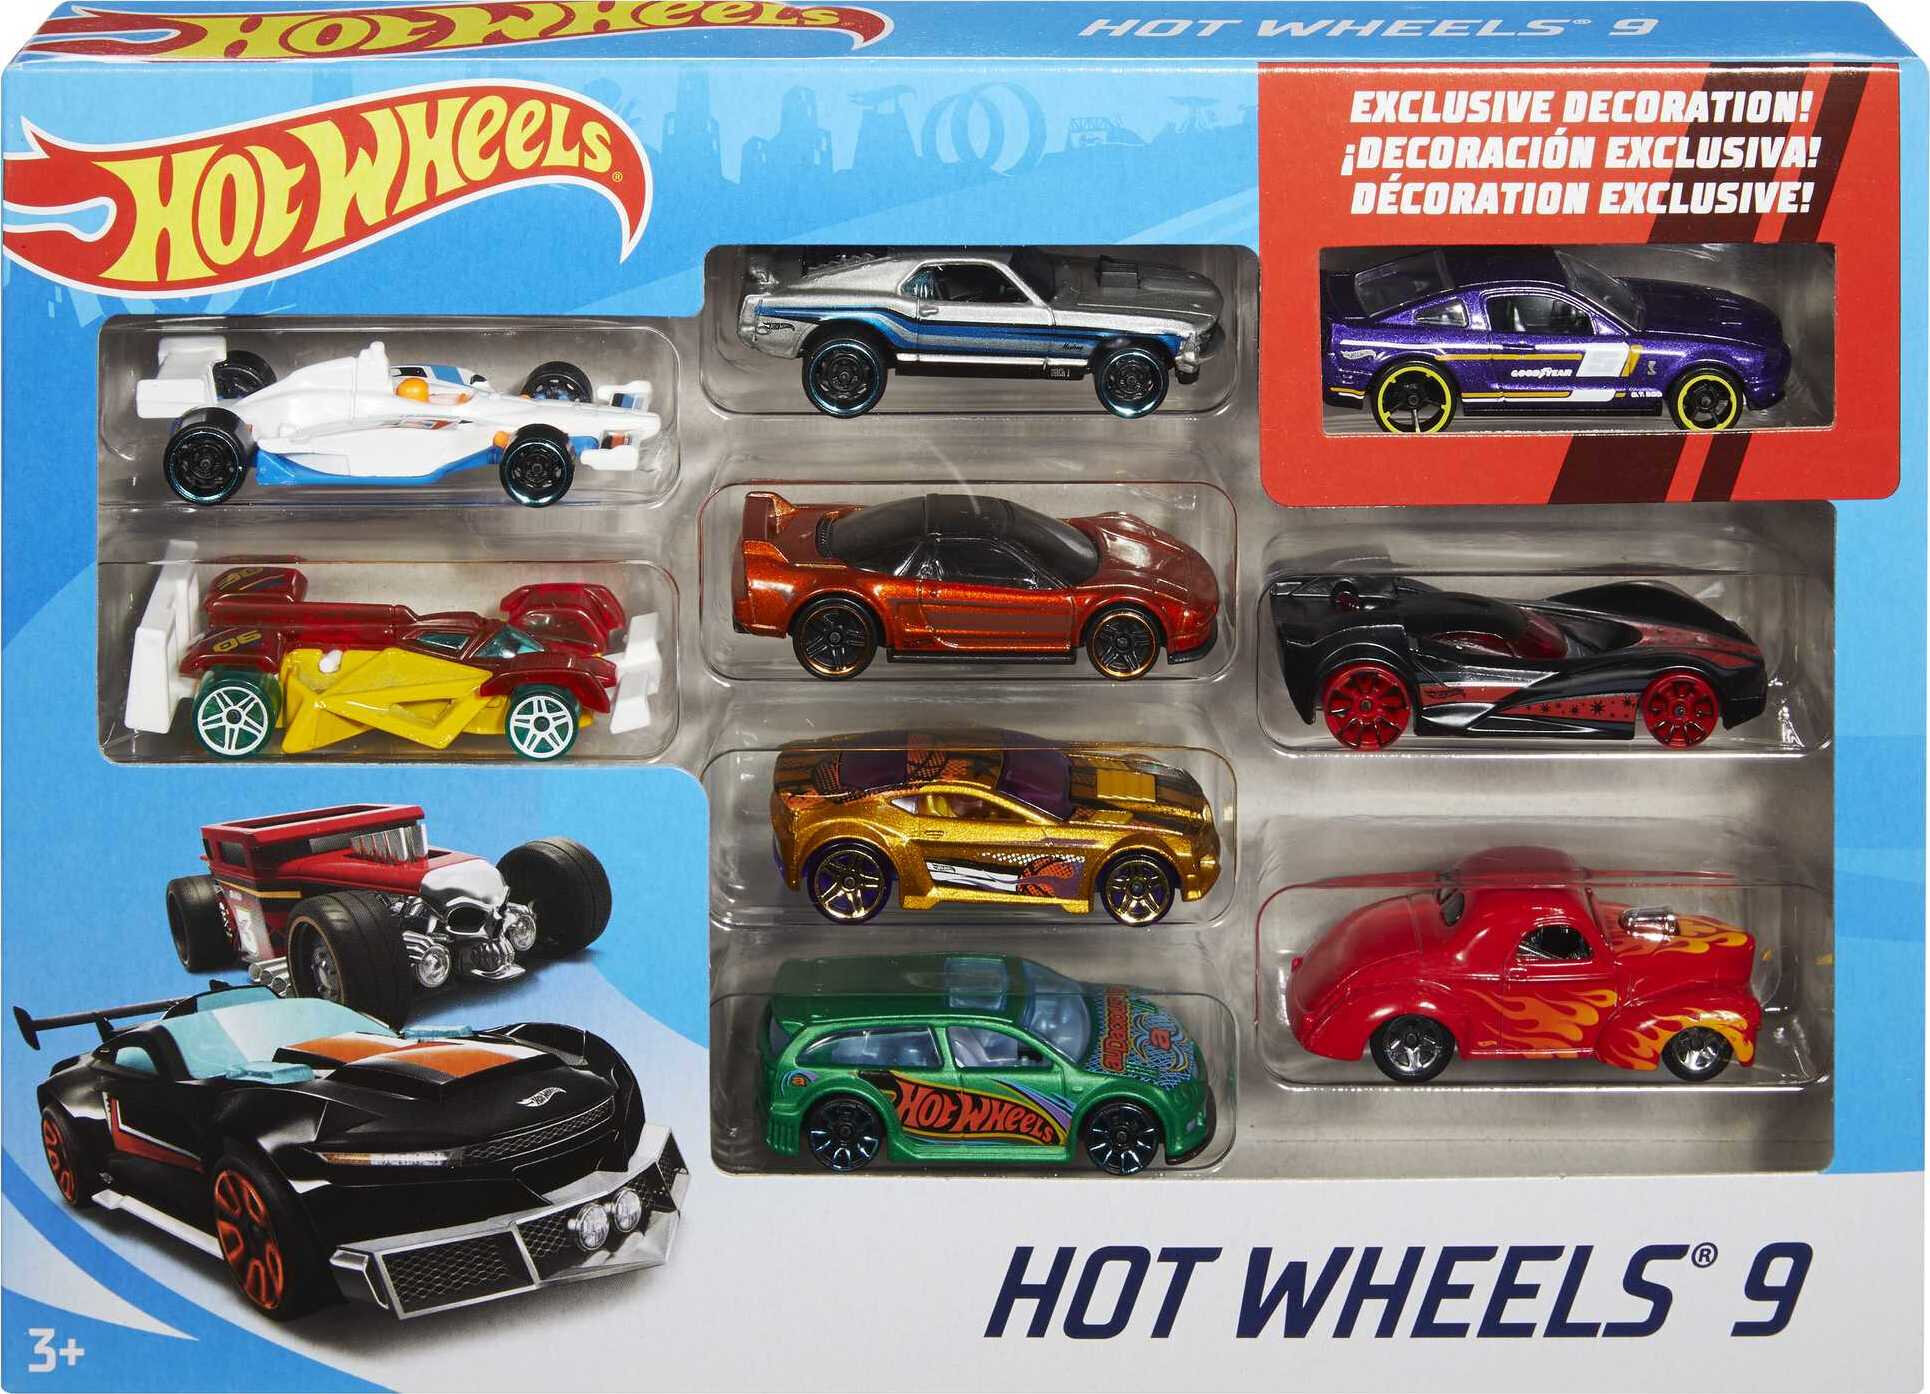 Hot Wheels Gift Set of 9 Toy Cars or Trucks in 1:64 Scale (Styles May Vary) - image 5 of 7